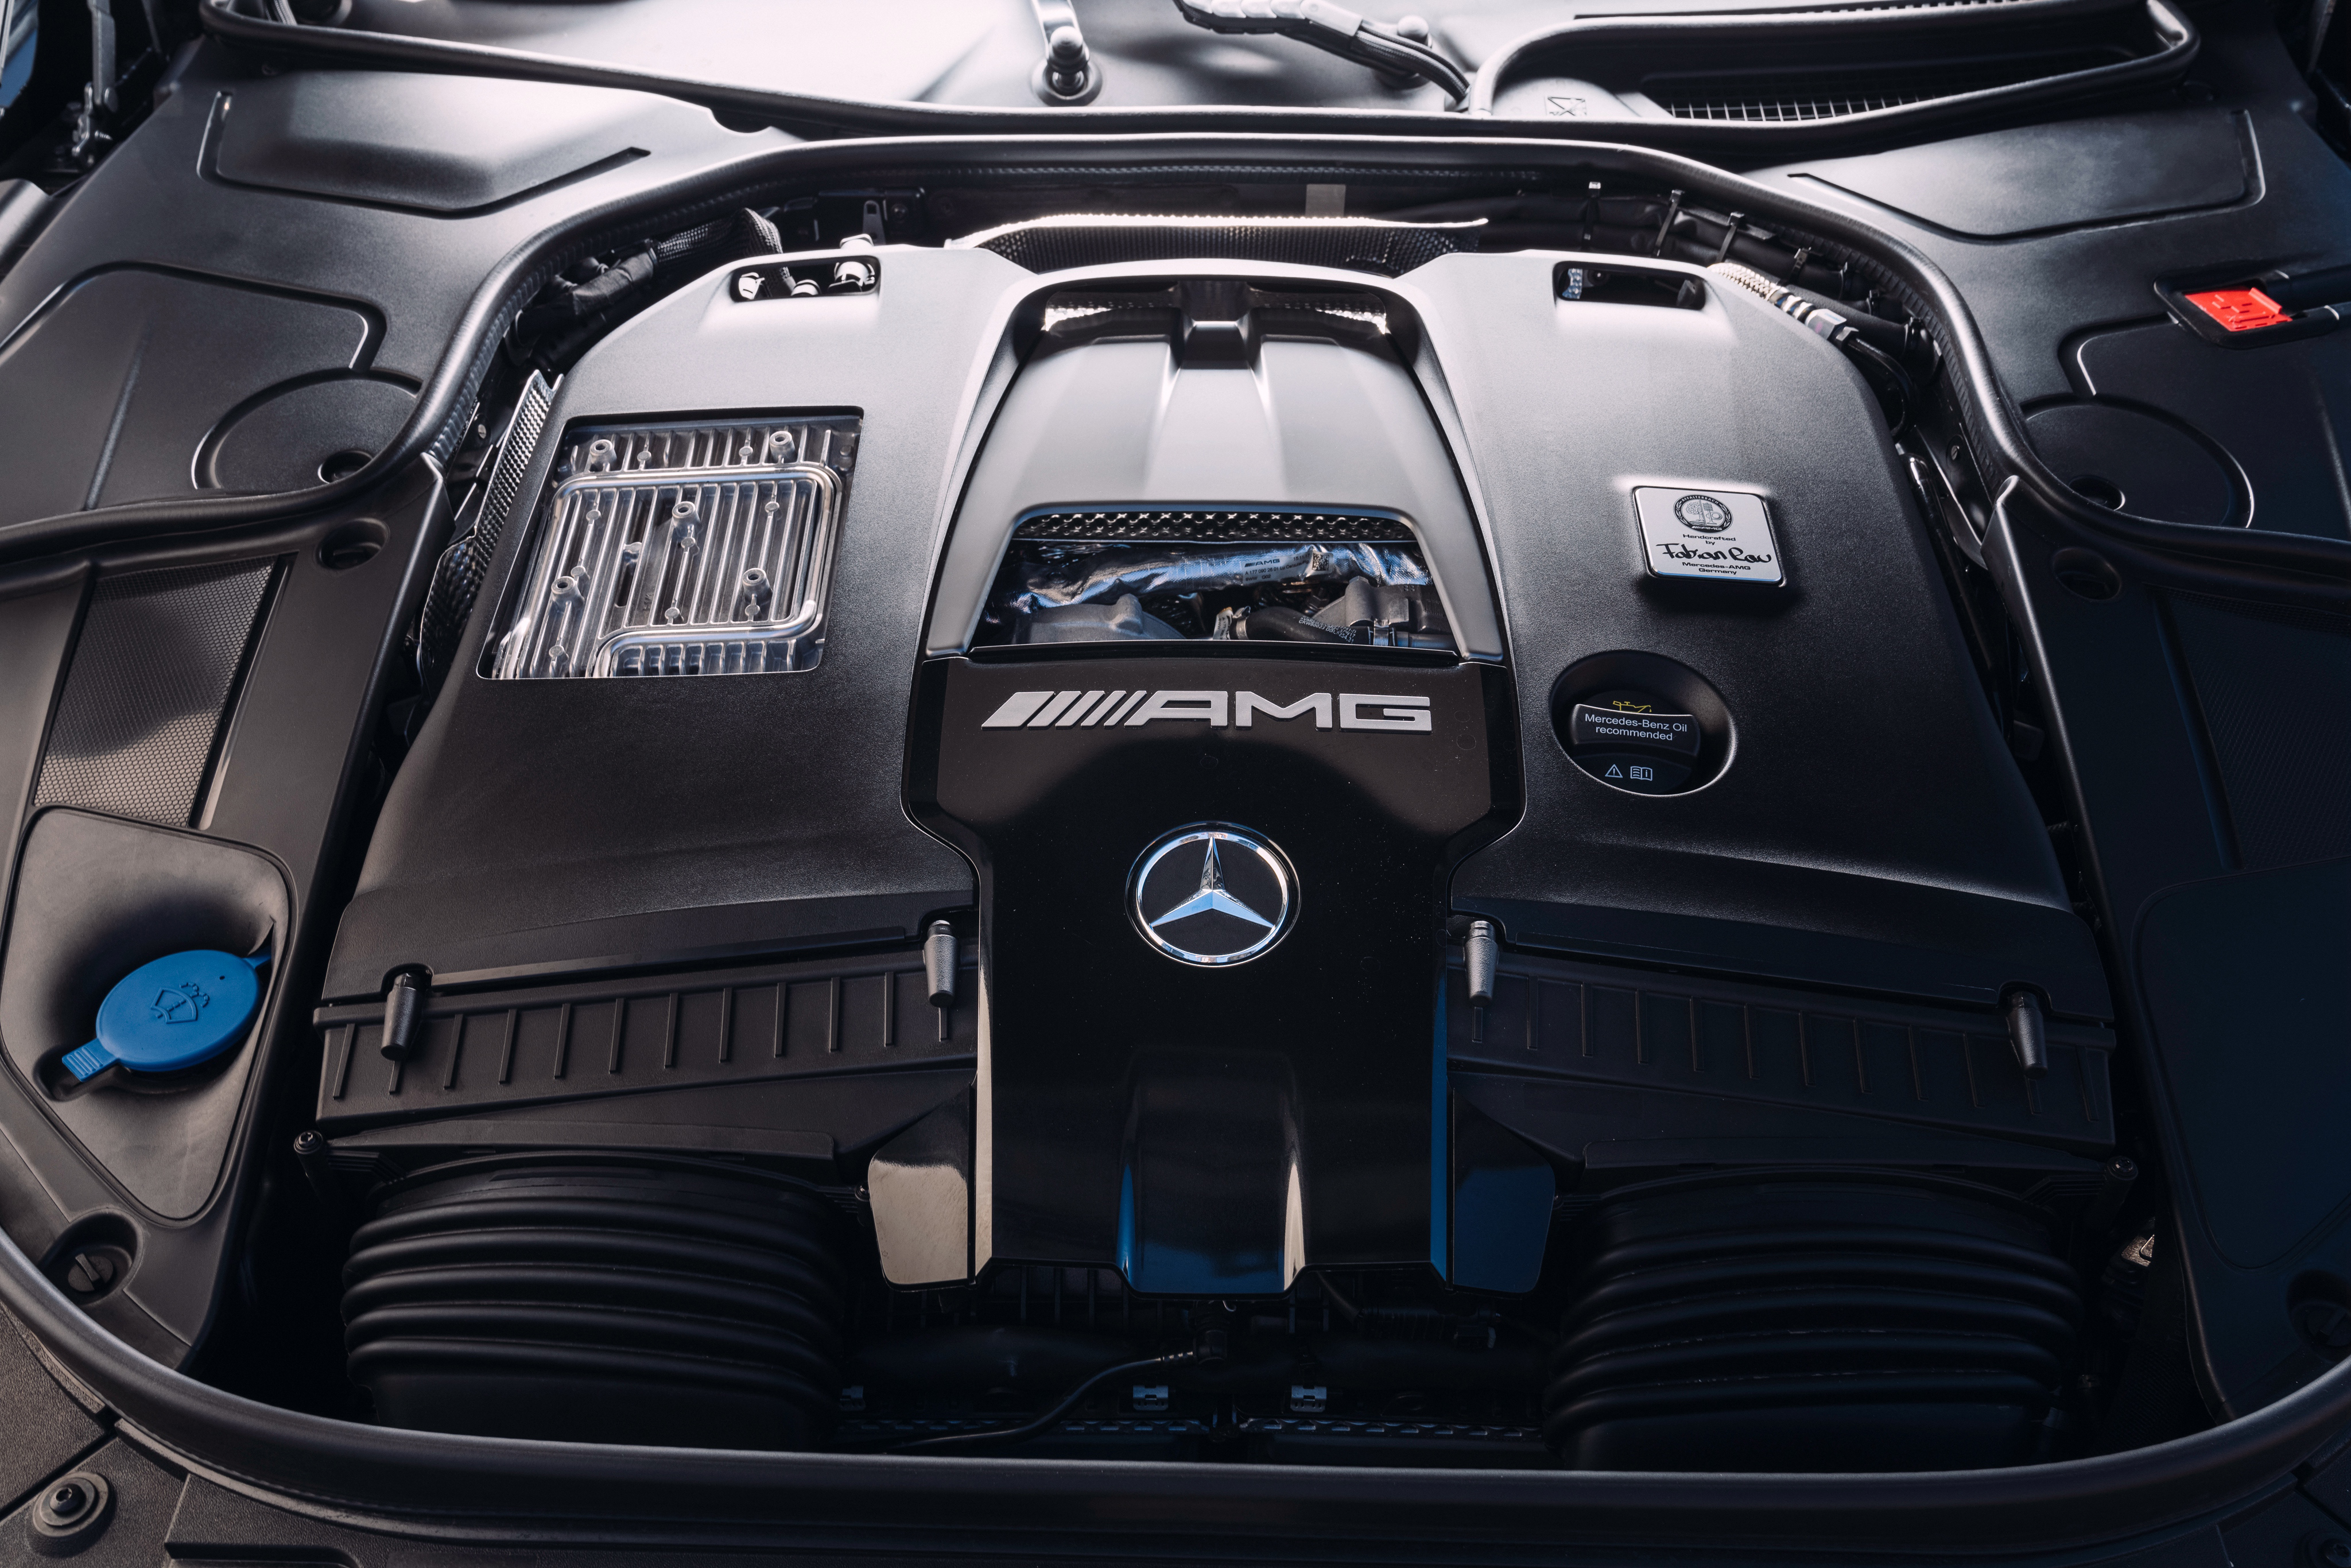 Mercedes AMG S63 2018 Engine View 4k, HD Cars, 4k Wallpapers, Images,  Backgrounds, Photos and Pictures